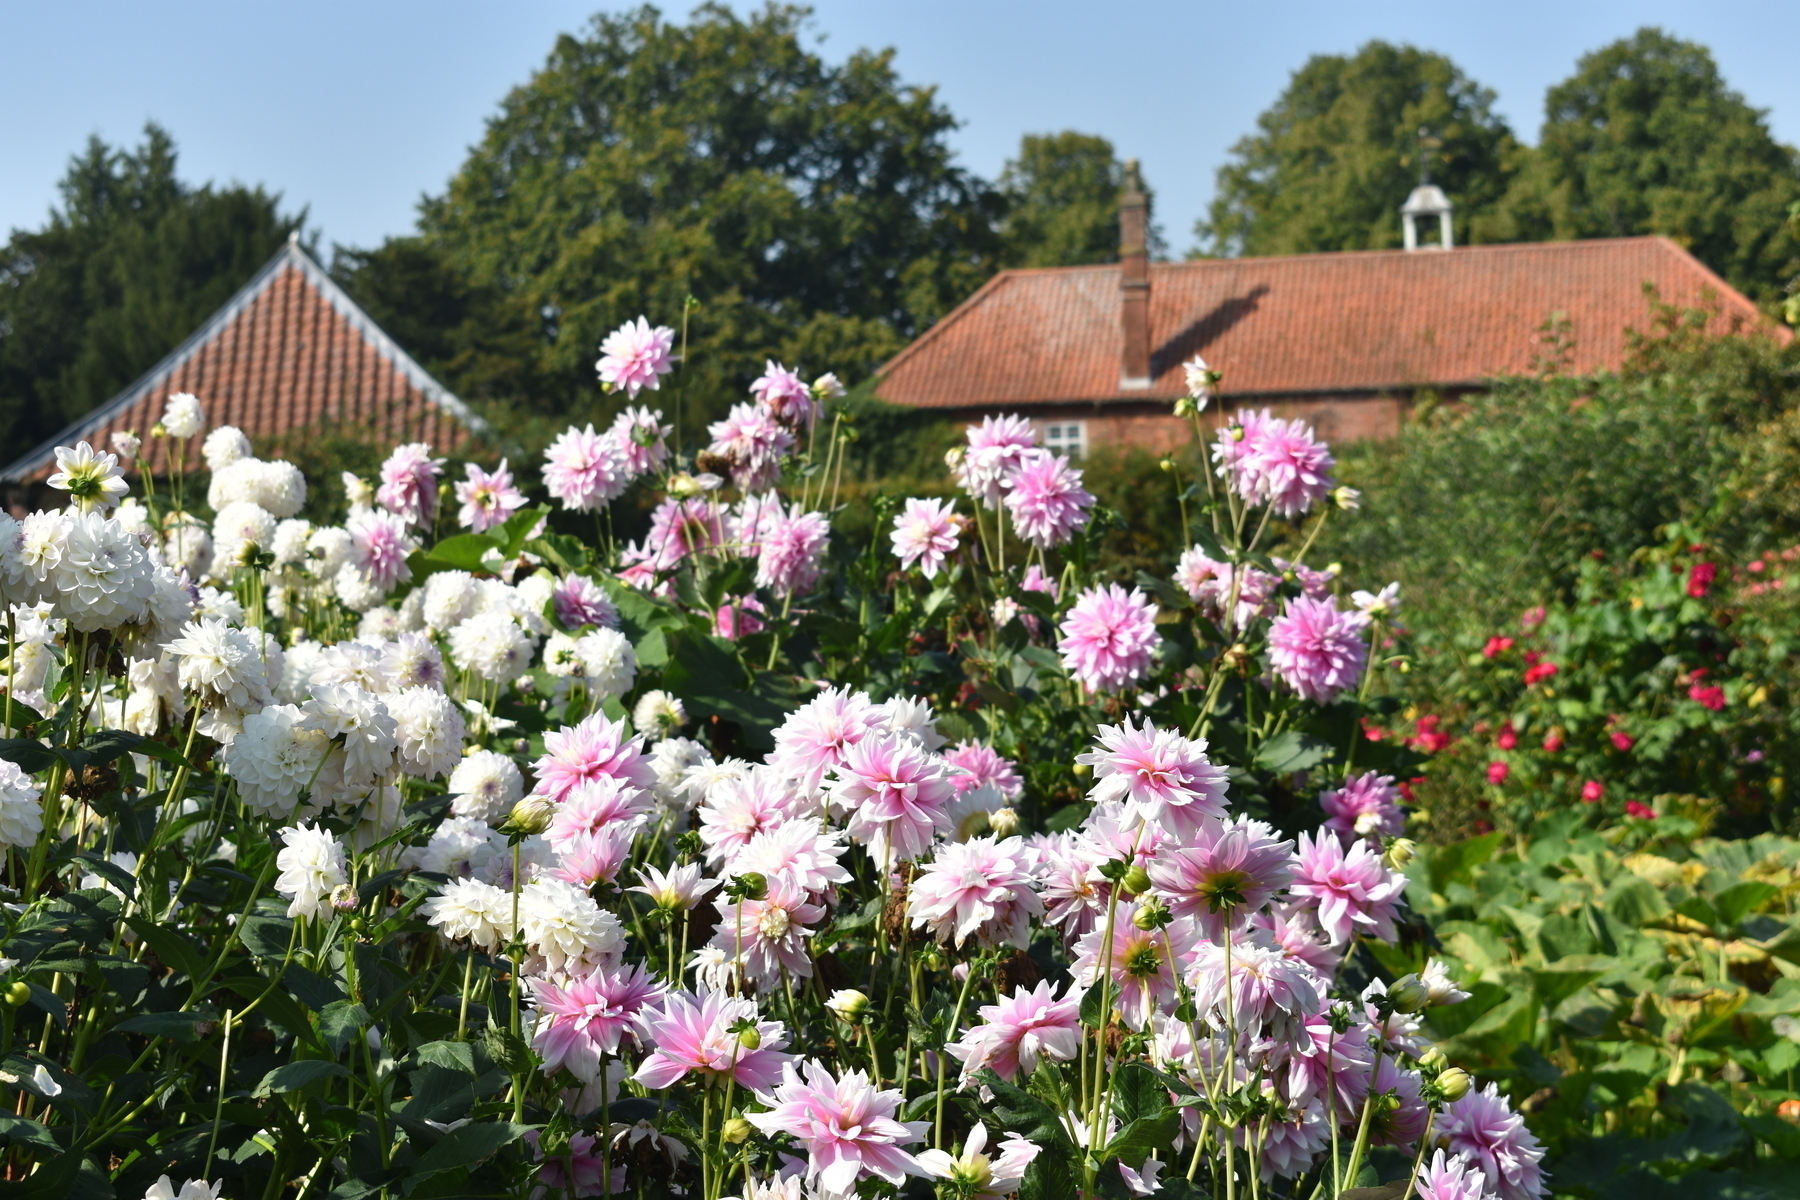 A mass of pink and white dahlia blooms in the foreground with red brick buildings slightly out of focus in the background.